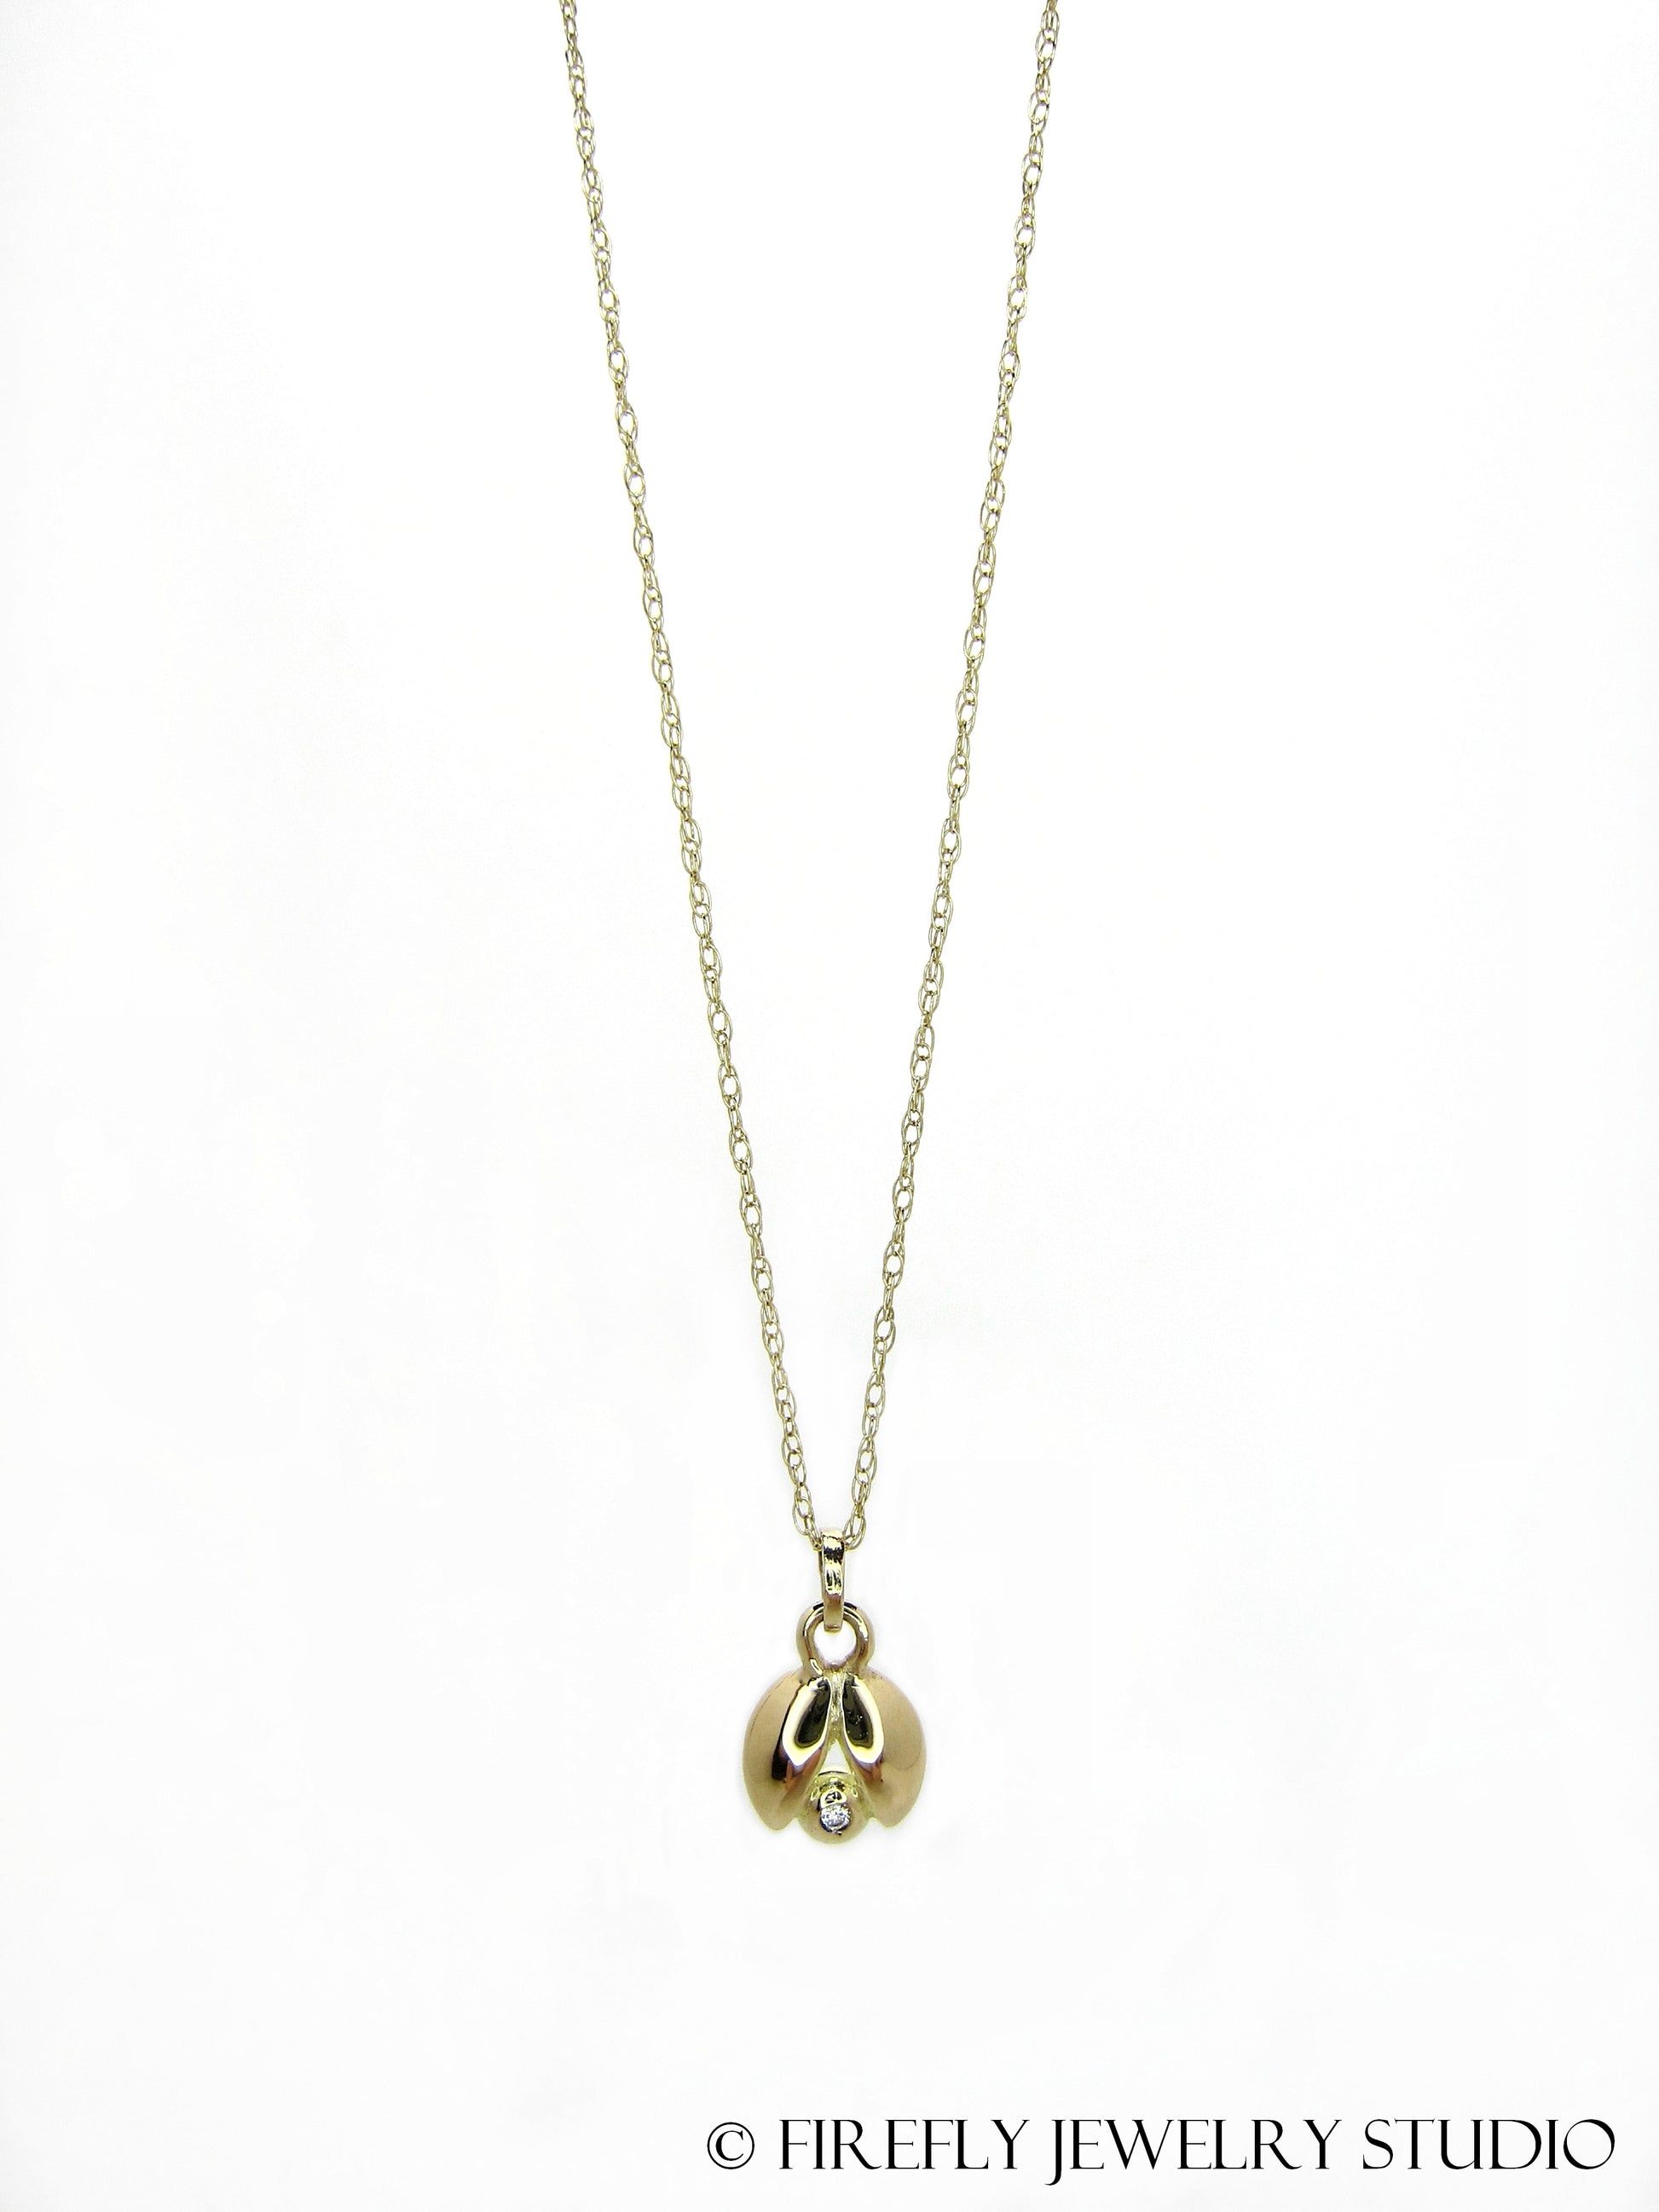 18k Yellow Gold Mini-Firefly Necklace with Diamond - Made to Order - Firefly Jewelry Studio